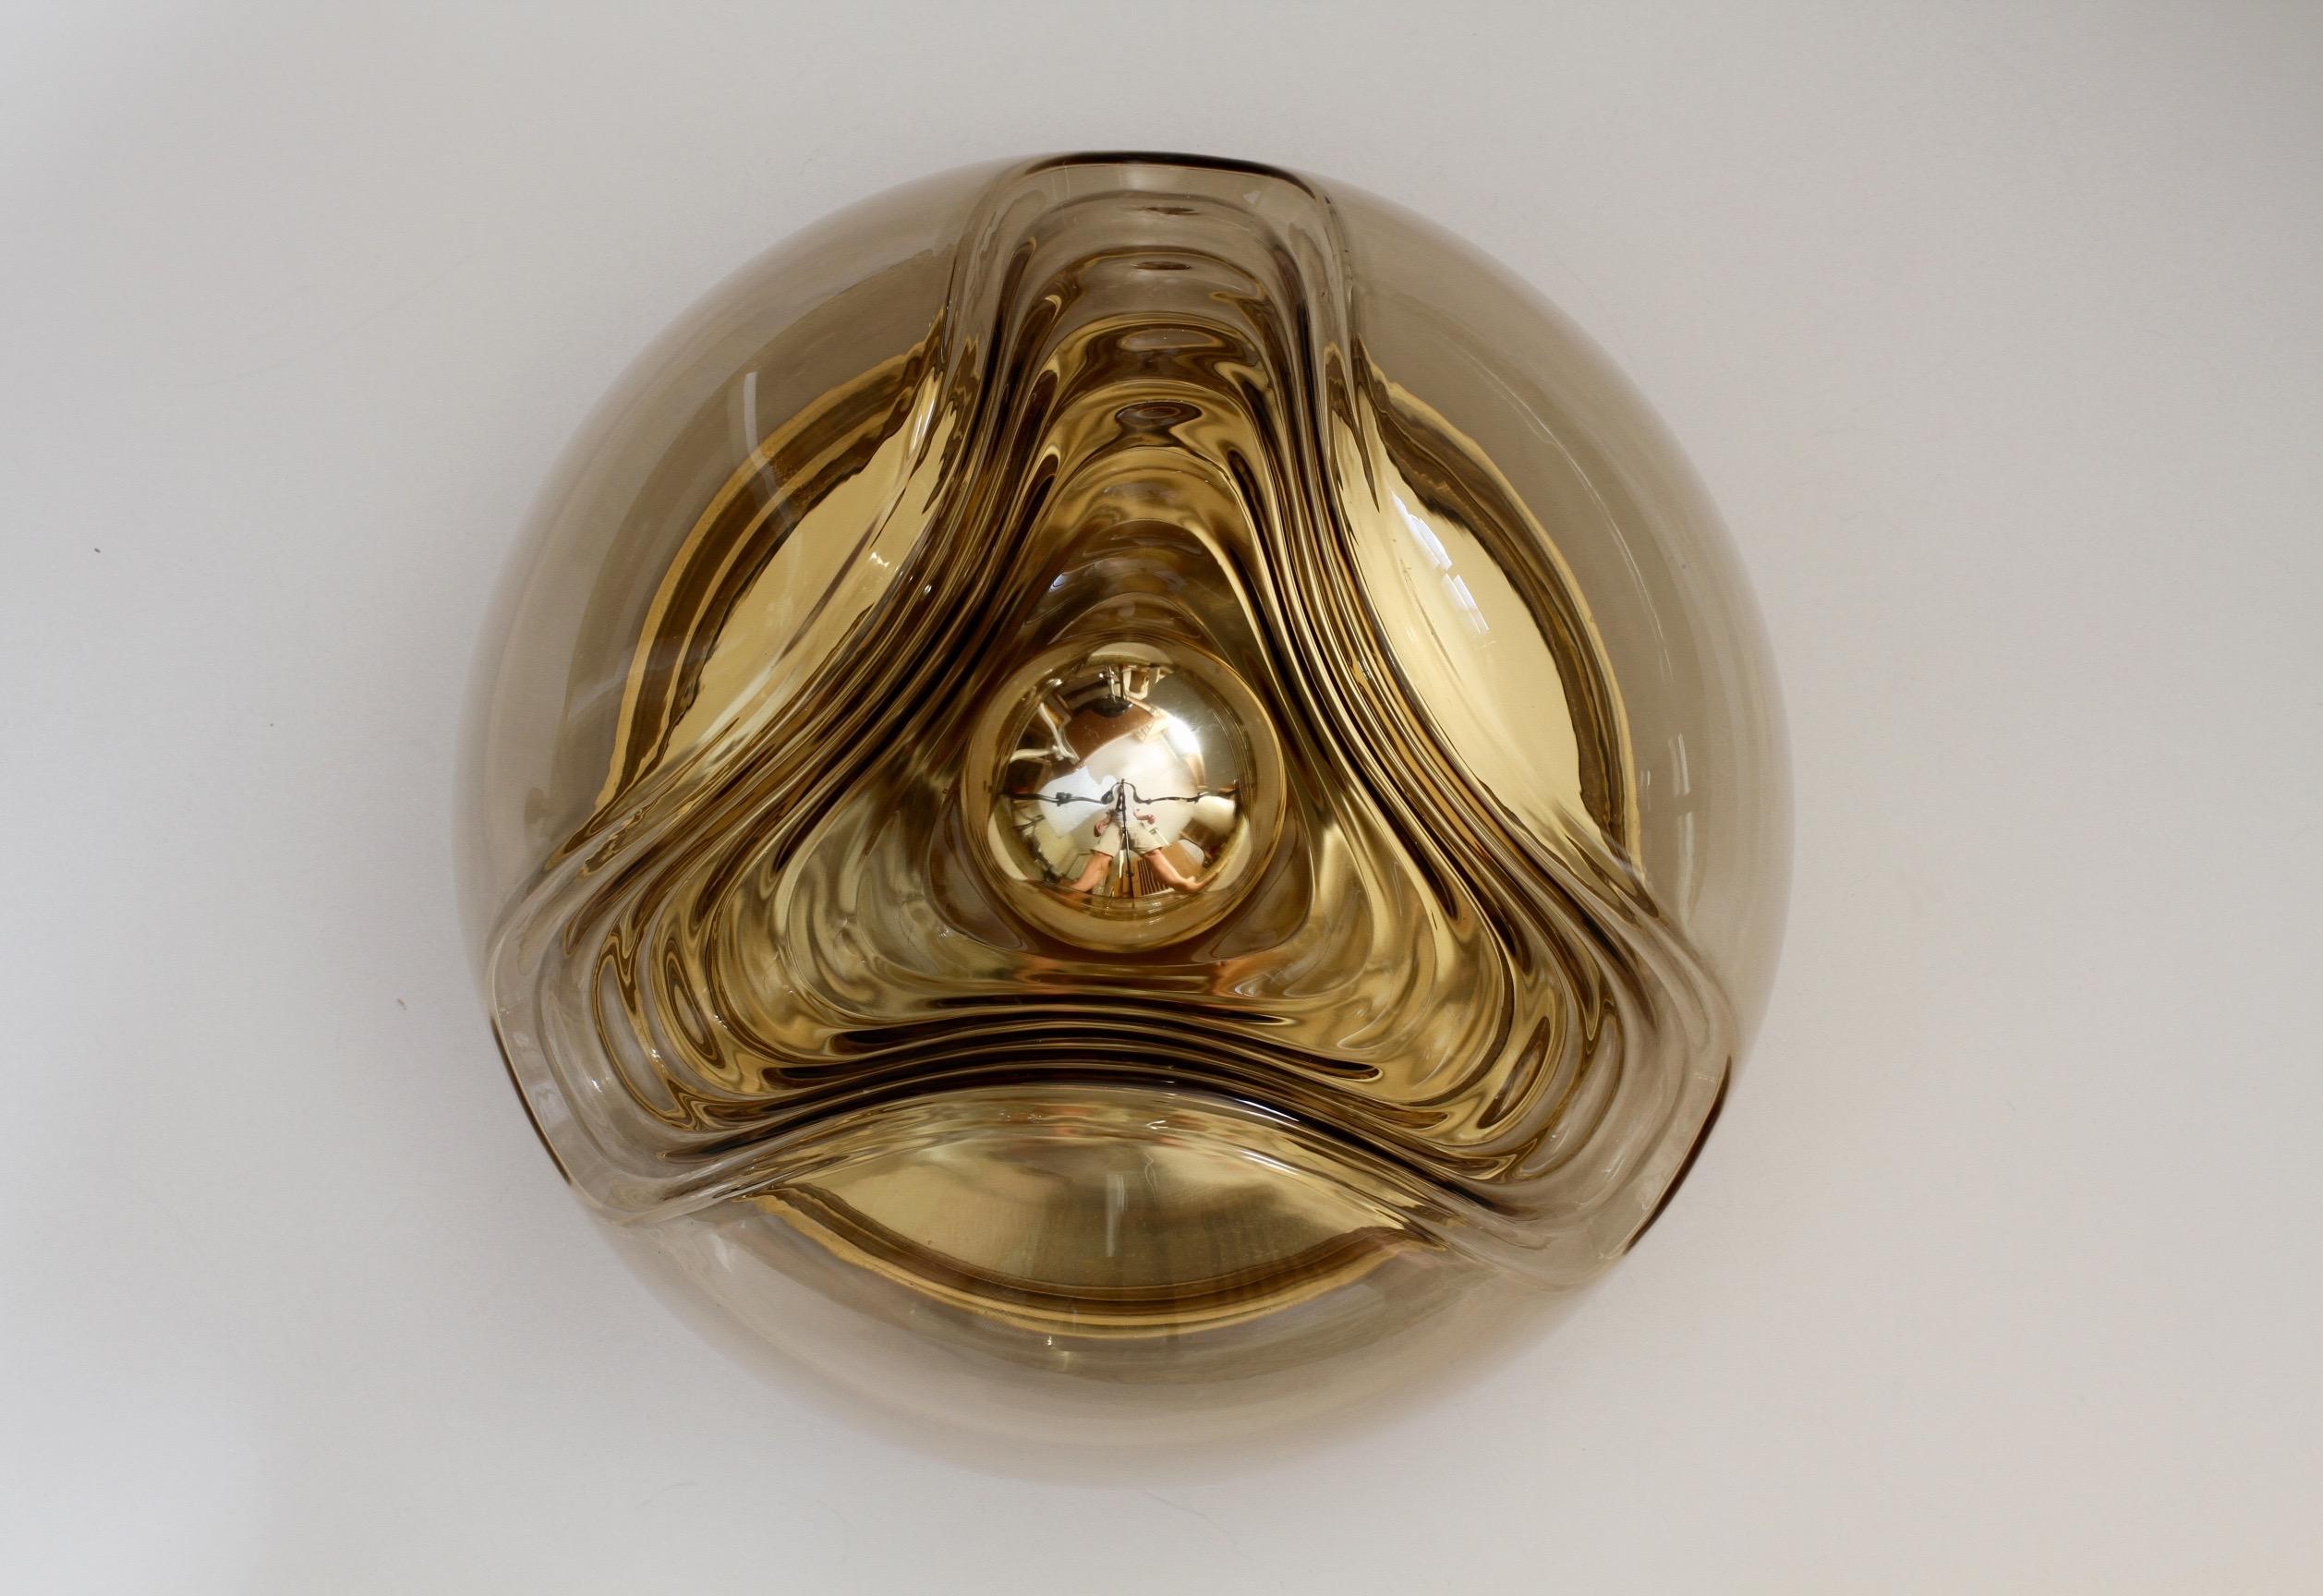 Midcentury pair of 32cm diameter flush mount wall lights or sconces by Peill & Putzler in the 1970s. This is an absolutely classic piece of German design, featuring a smoked toned colored glass globe shade with a waved/ribbed molded bubble form,